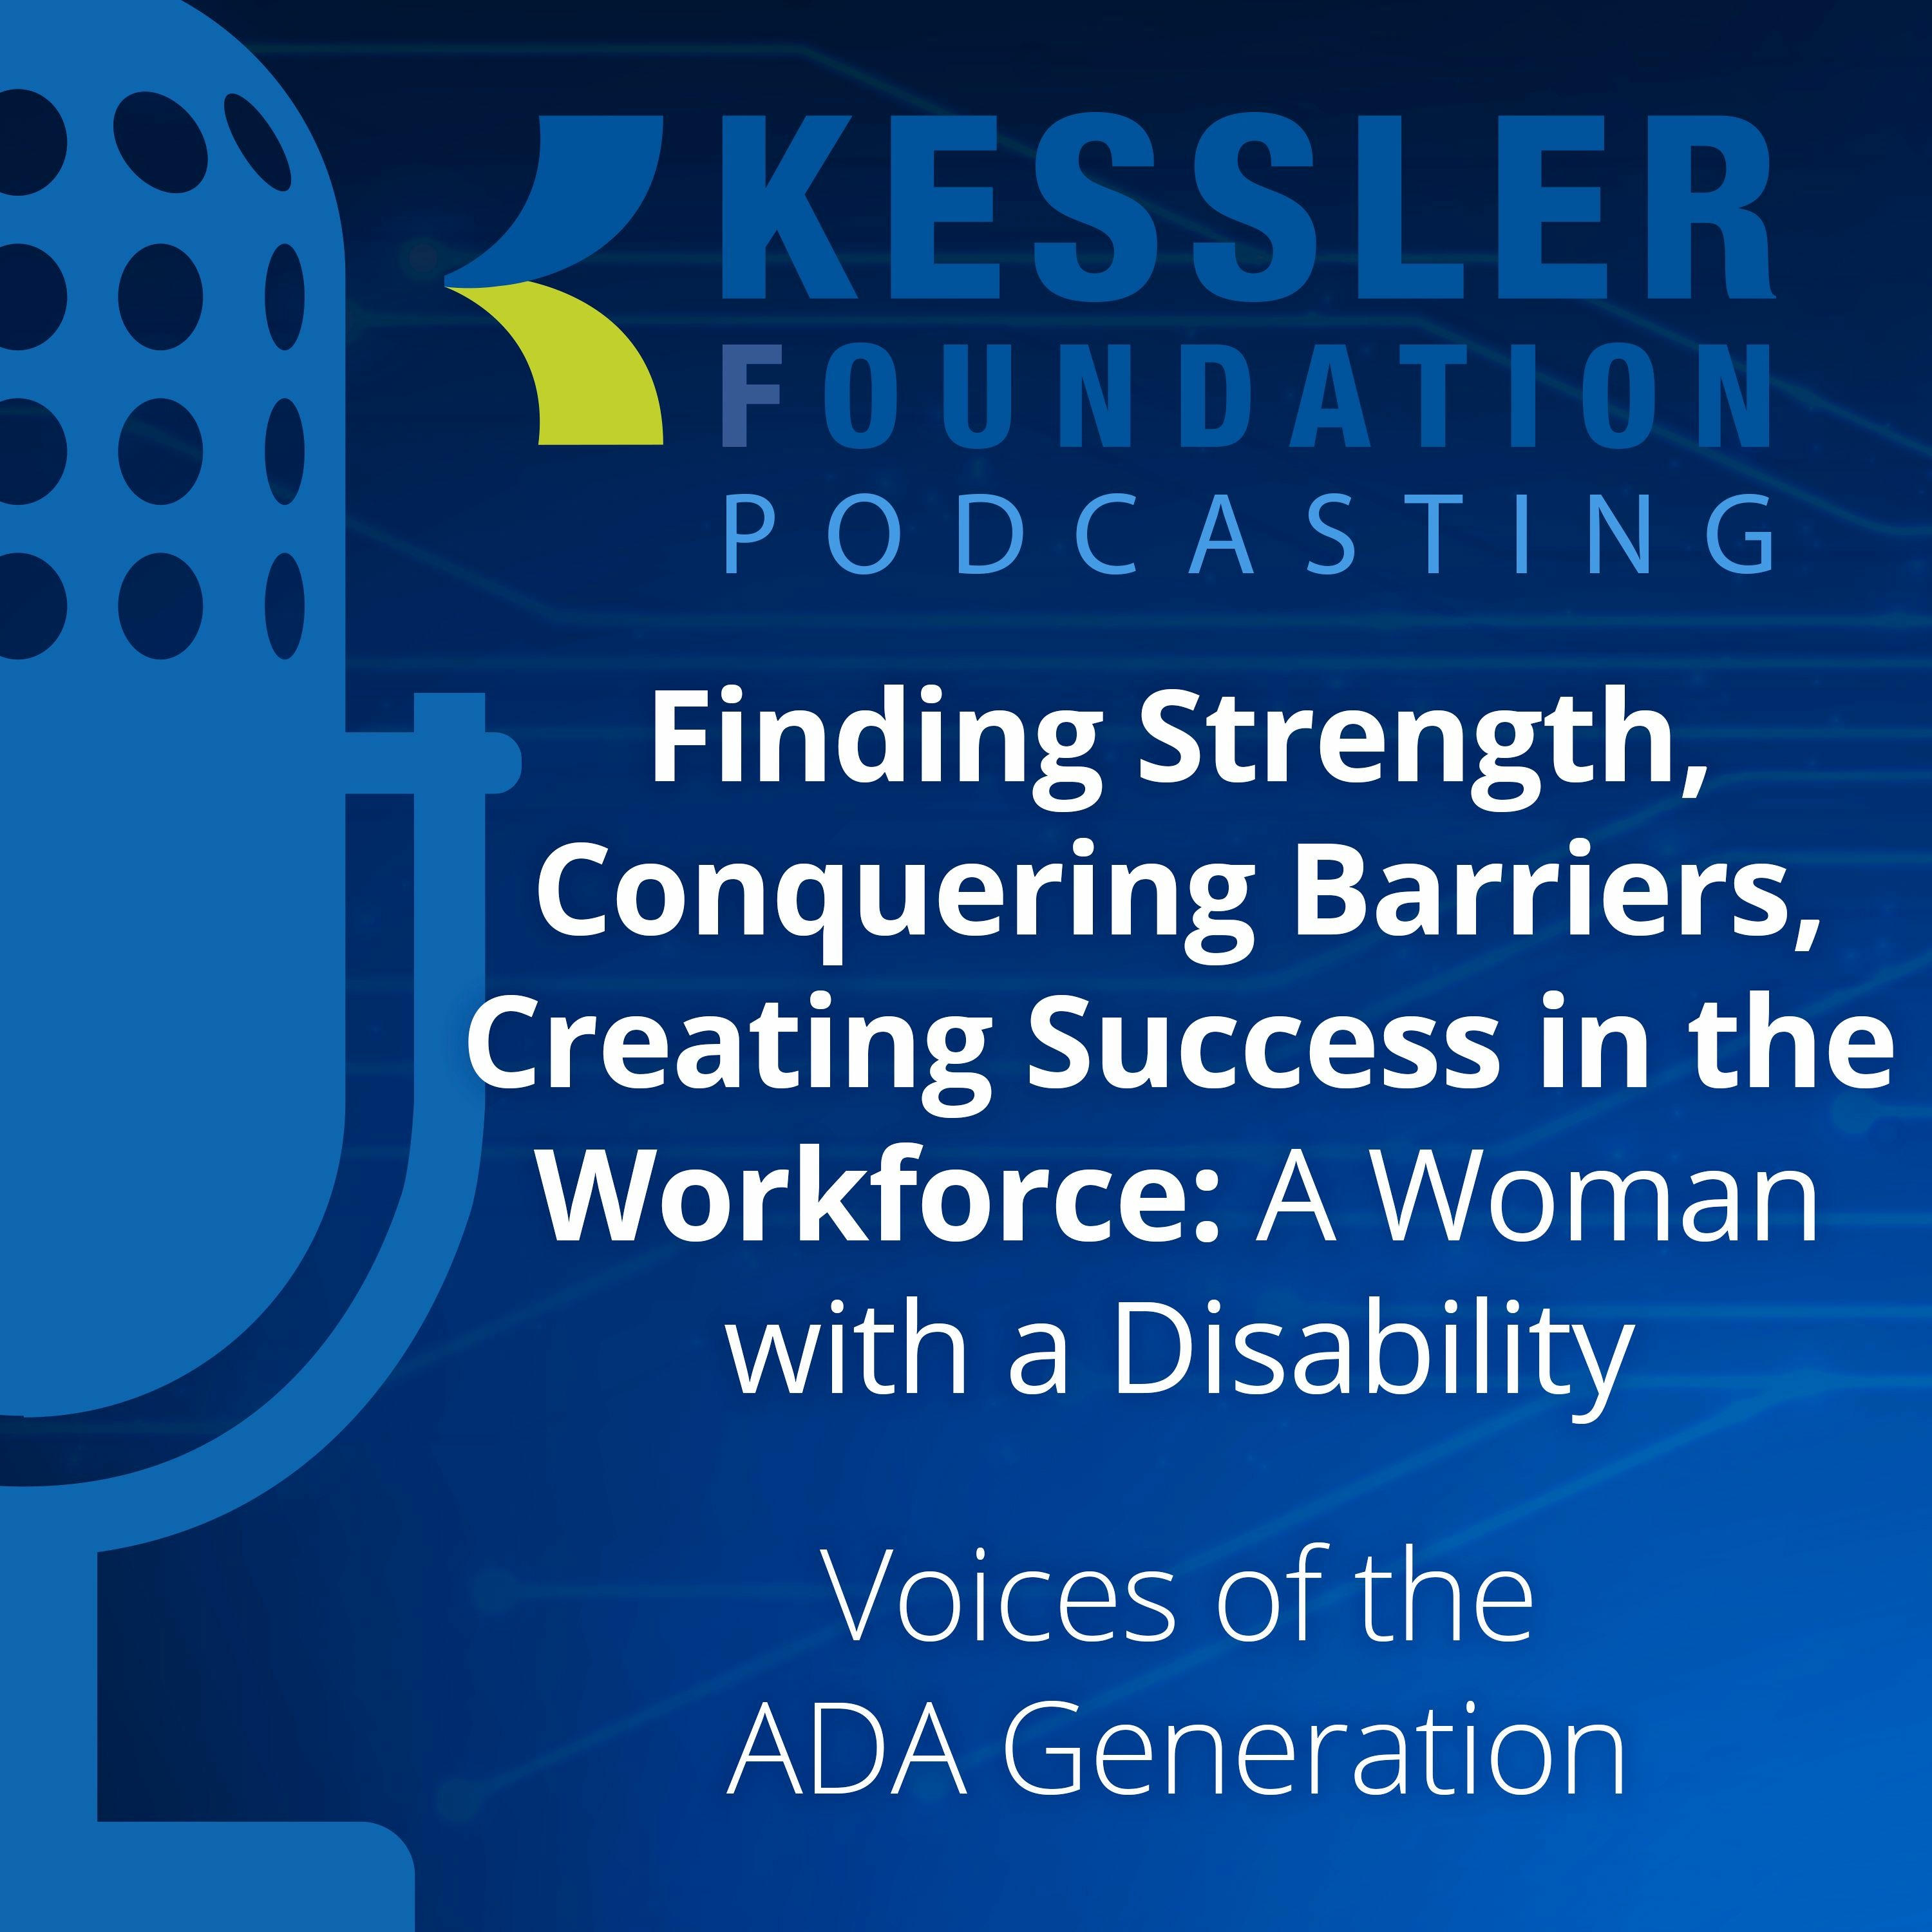 Finding Strength, Conquering Barriers, Creating Success in the Workforce: A Woman with a Disability